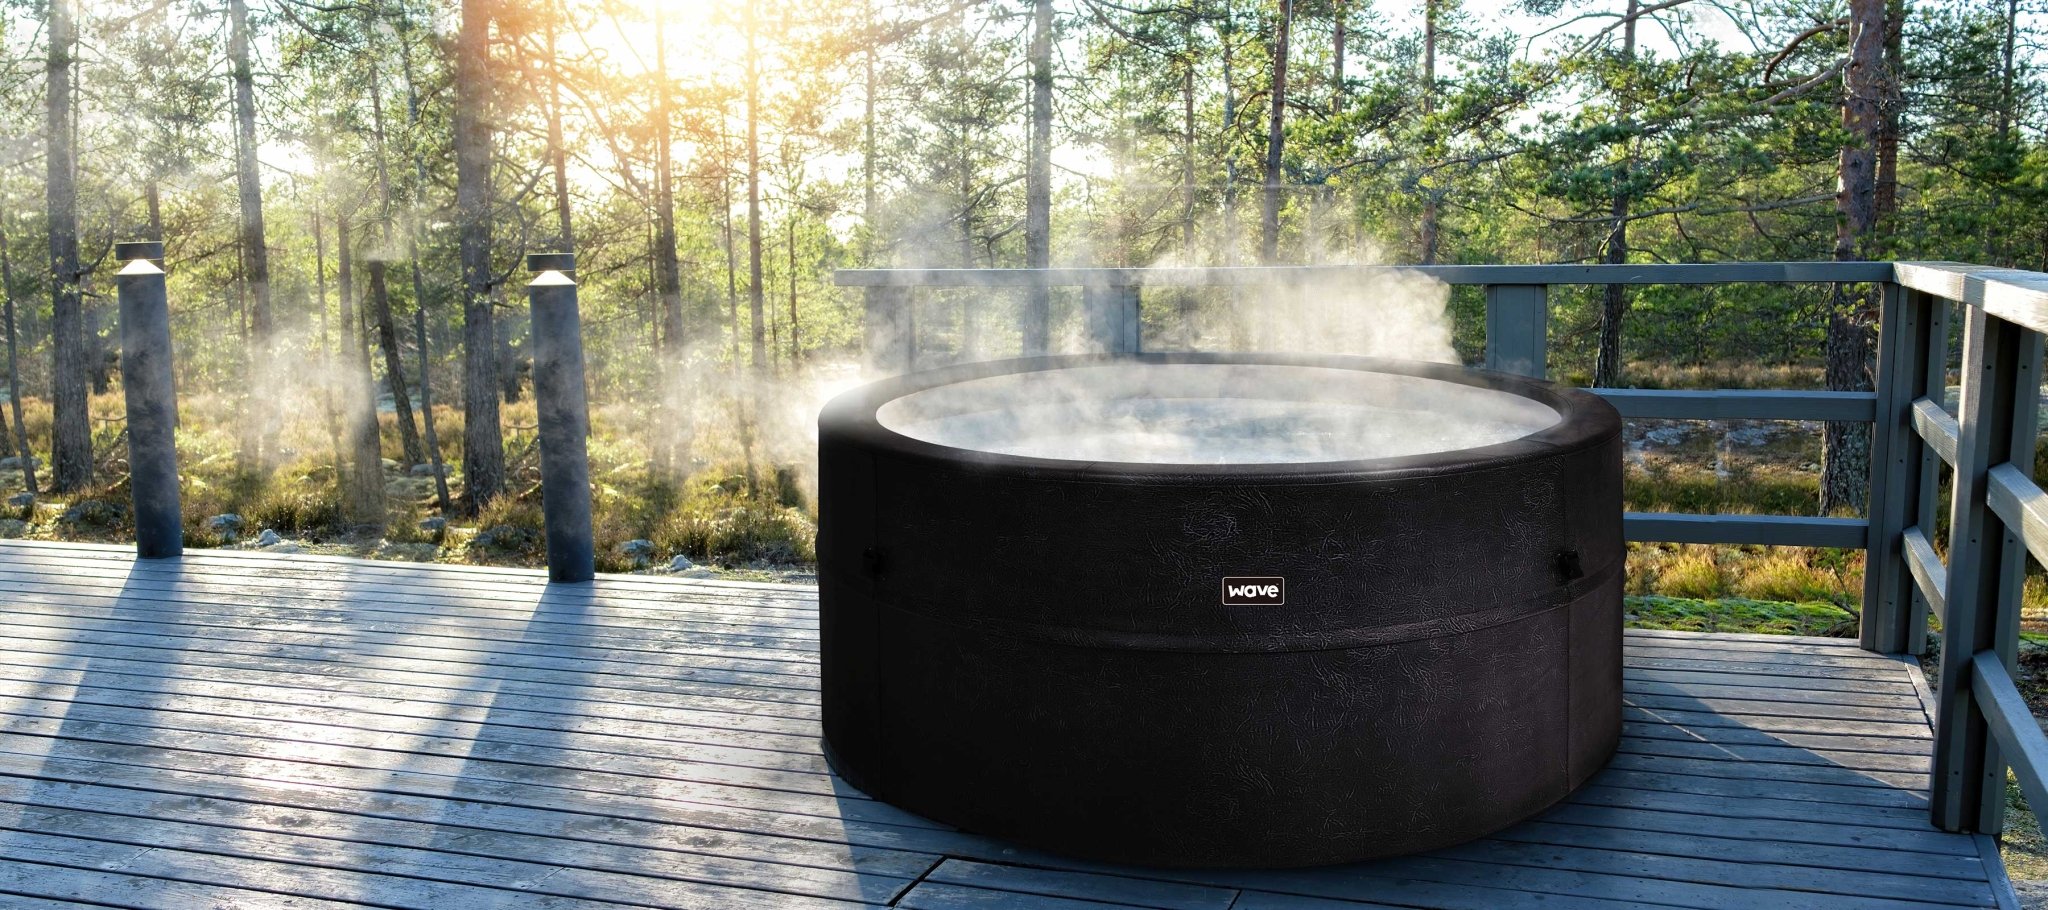 Embrace Winter Warmth: The Benefits of Hot Tubs in the Cold Season - Wave Spas UK